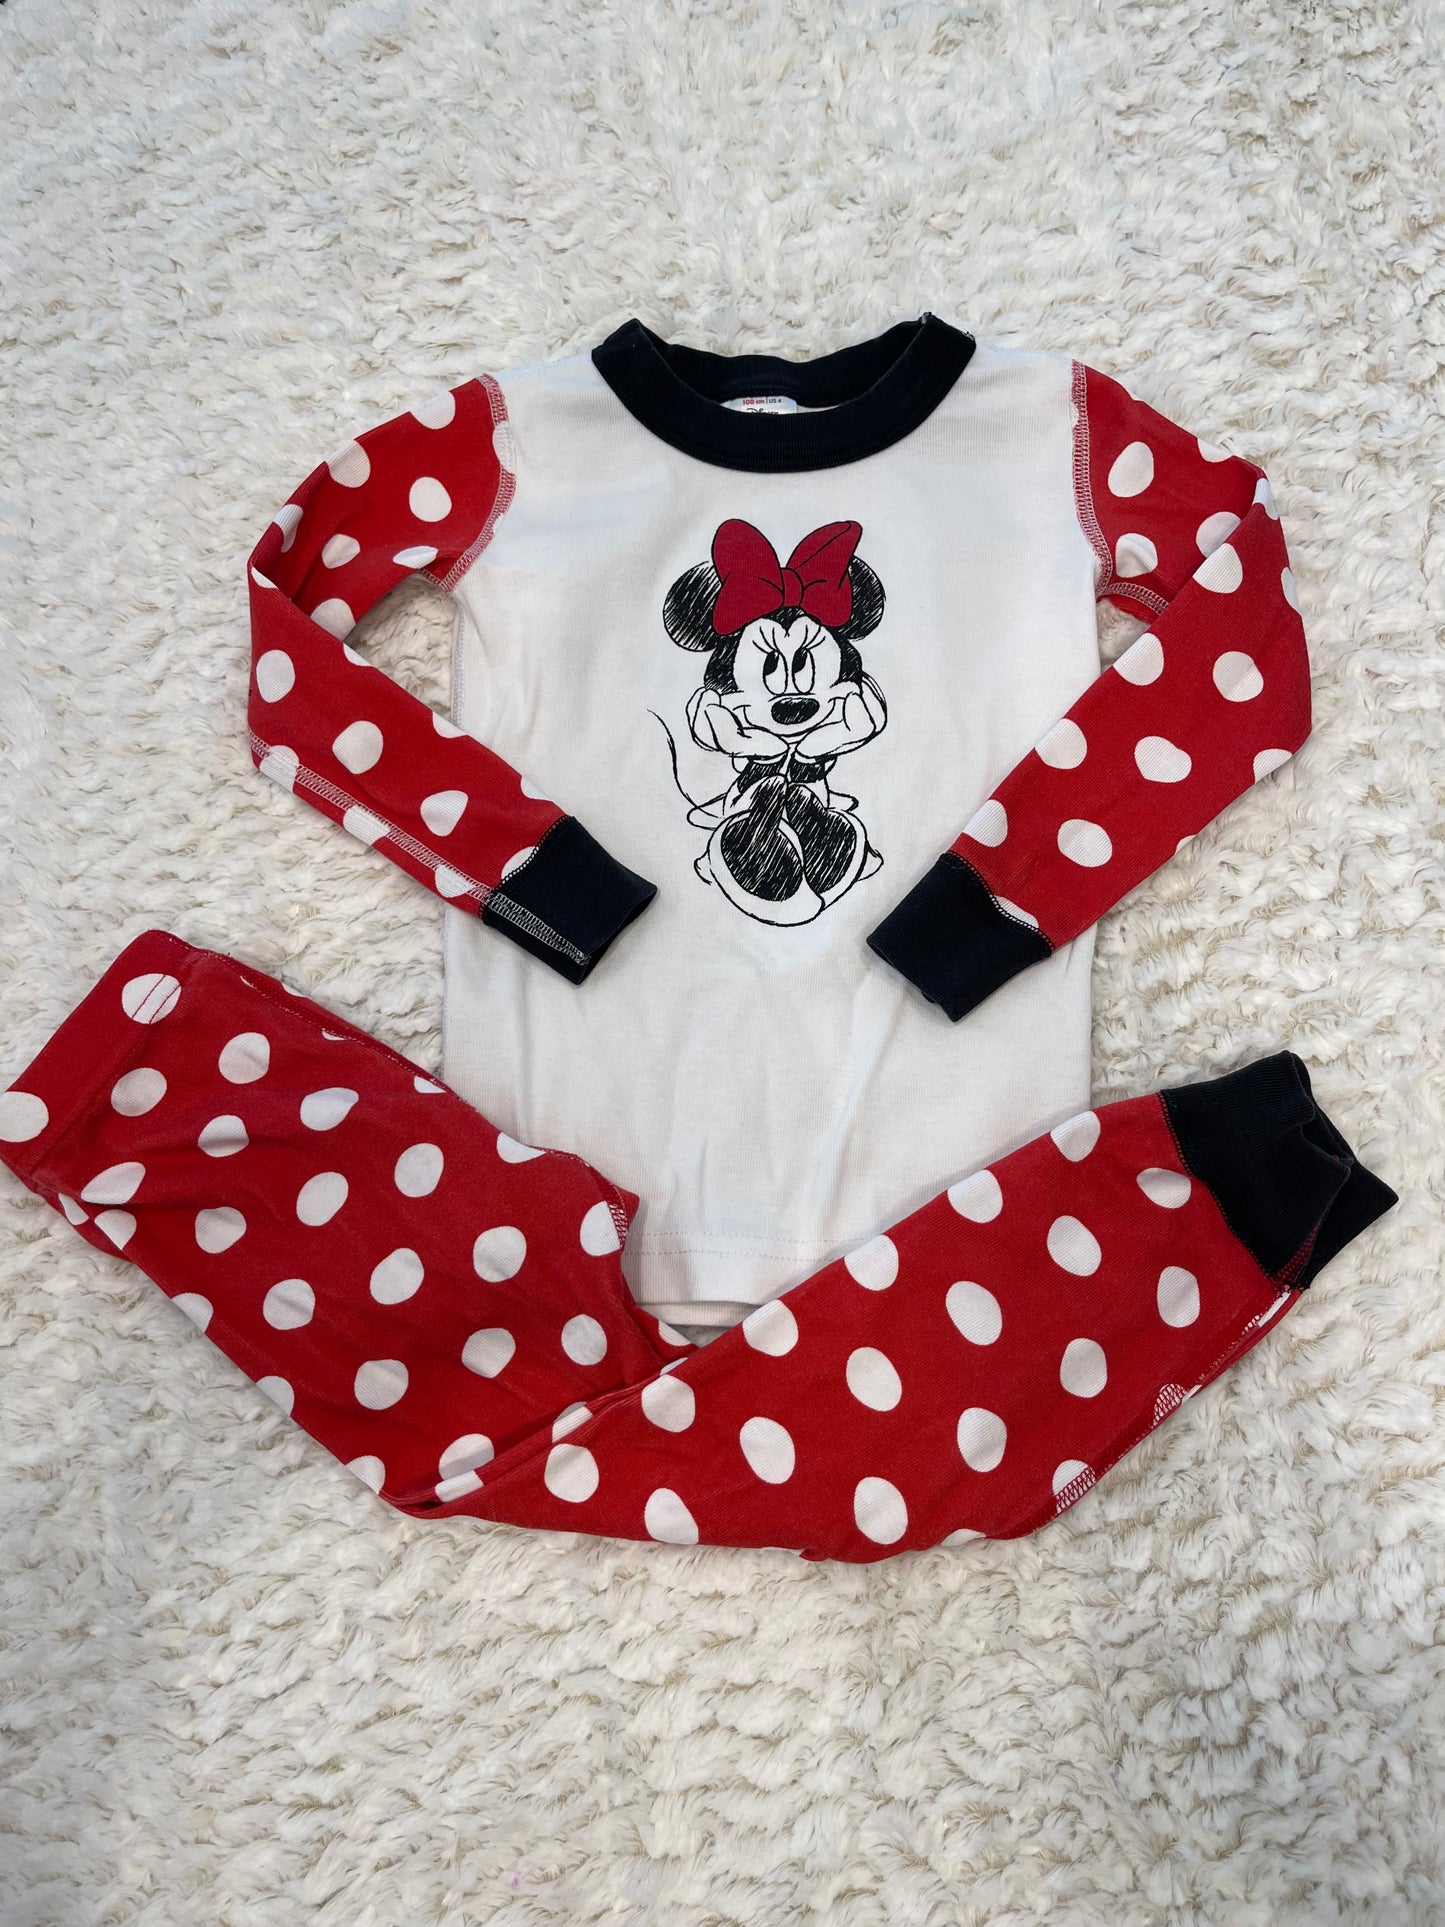 4T Hanna andersson Minnie Mouse pajamas